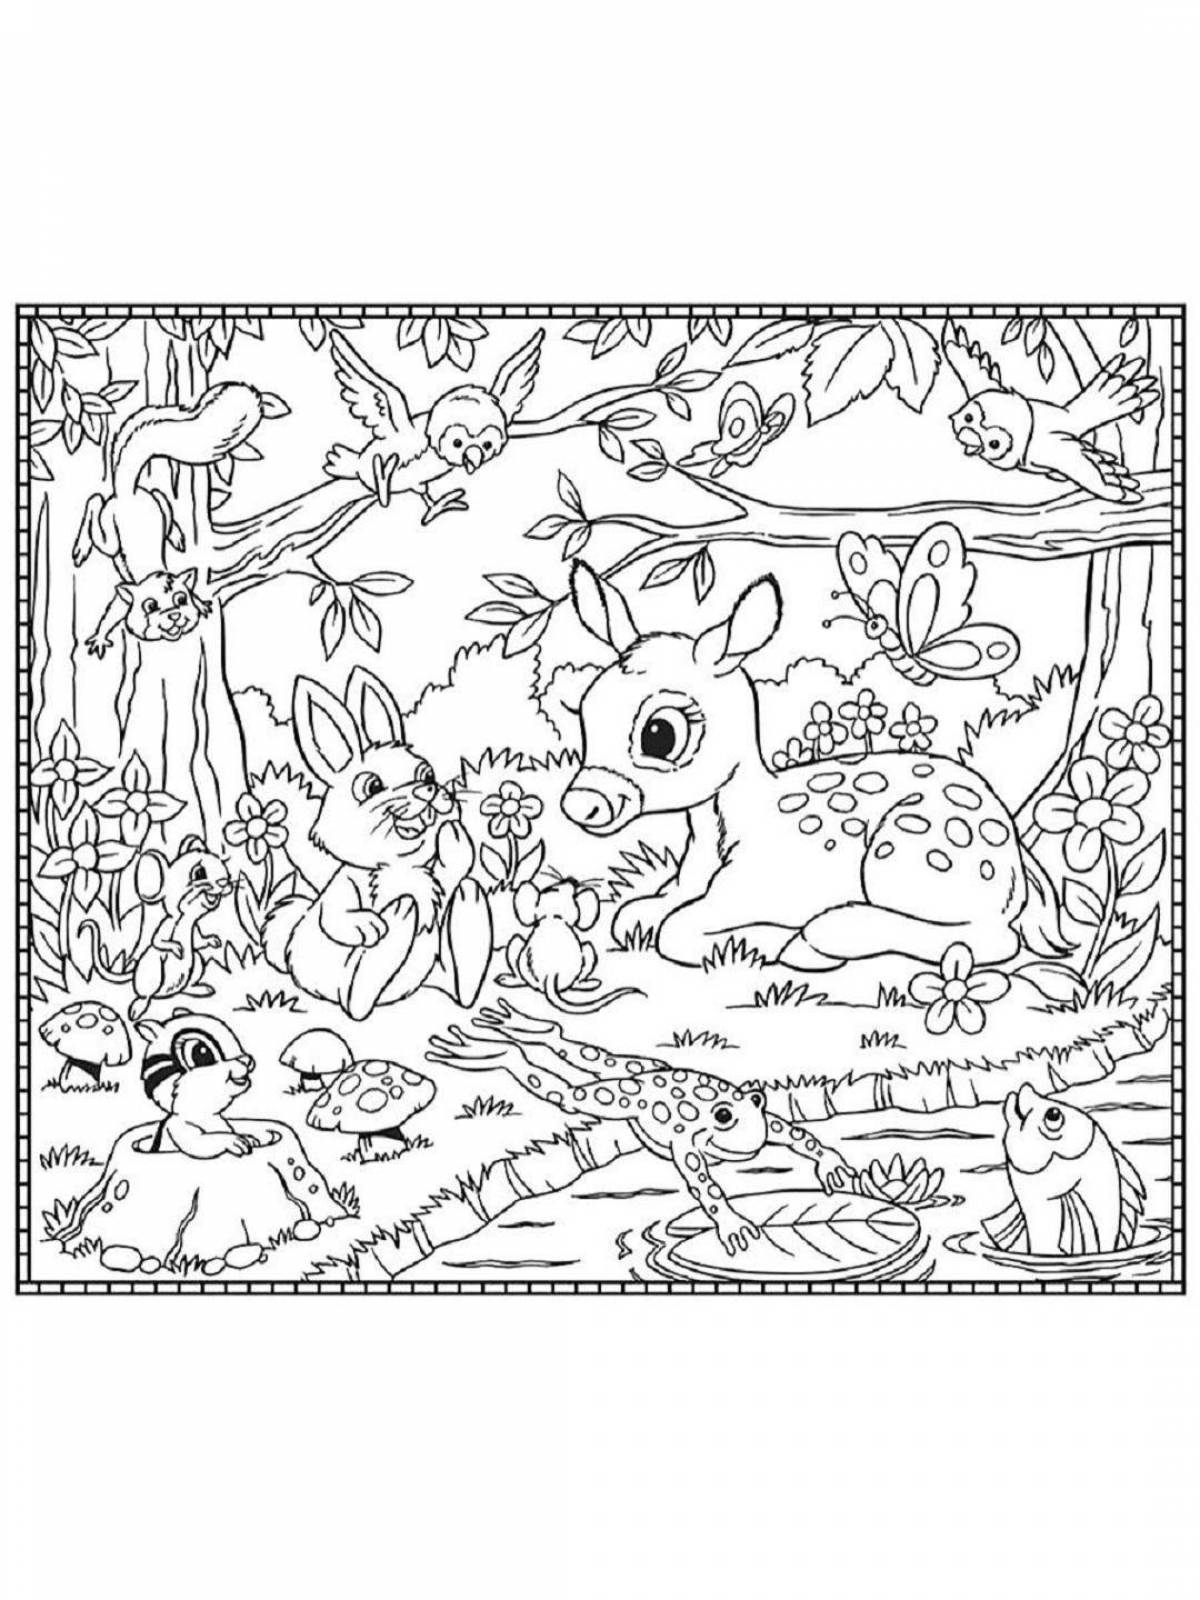 Shiny Carpet Coloring Page for Toddlers